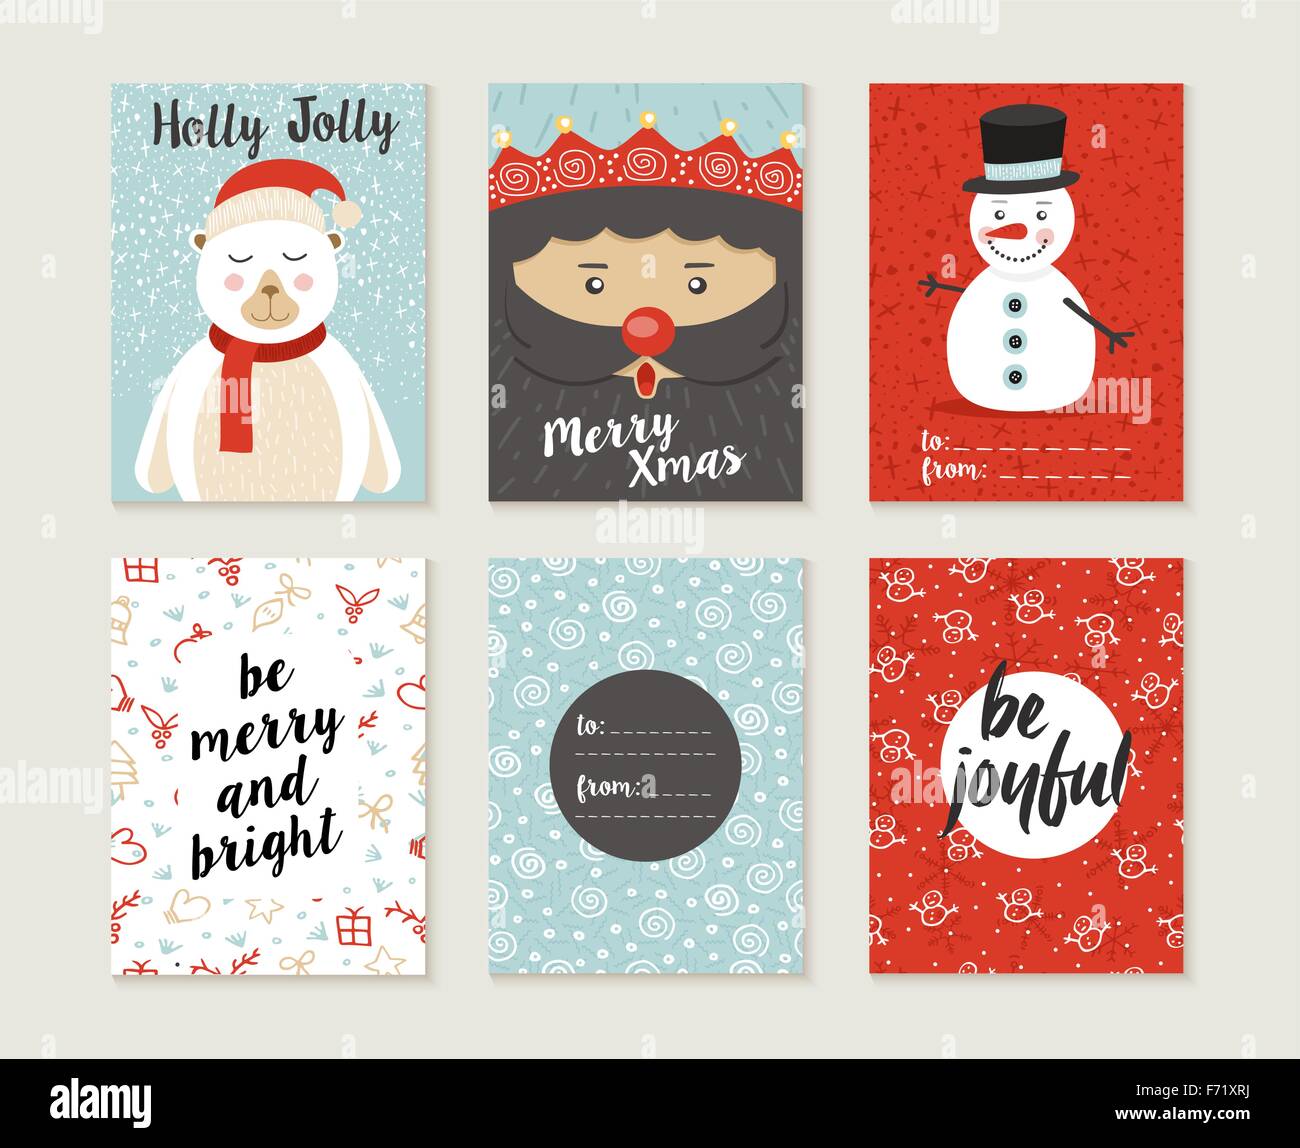 Merry Christmas greeting card set with cute polar bear, santa elf and snowman retro designs. Includes holiday themed patterns Stock Vector